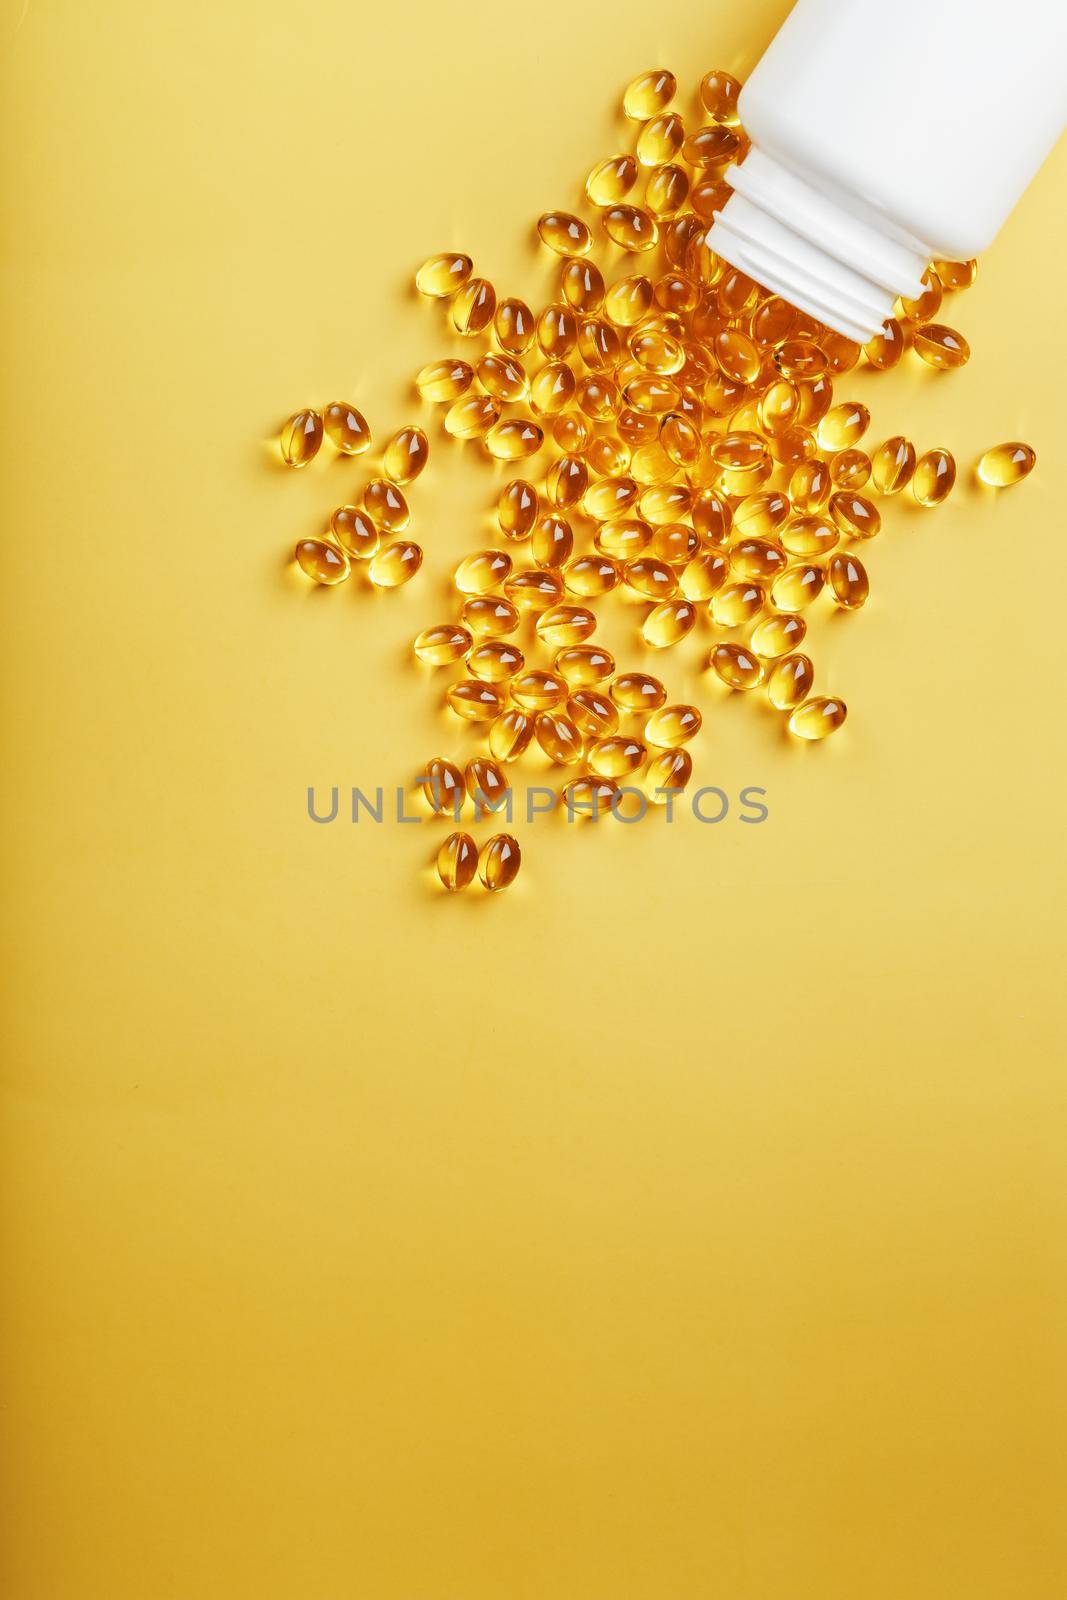 Gold Vitamin D3 capsules poured out of a jar on a yellow background with free space. The most important vitamin in an easily digestible liquid form.